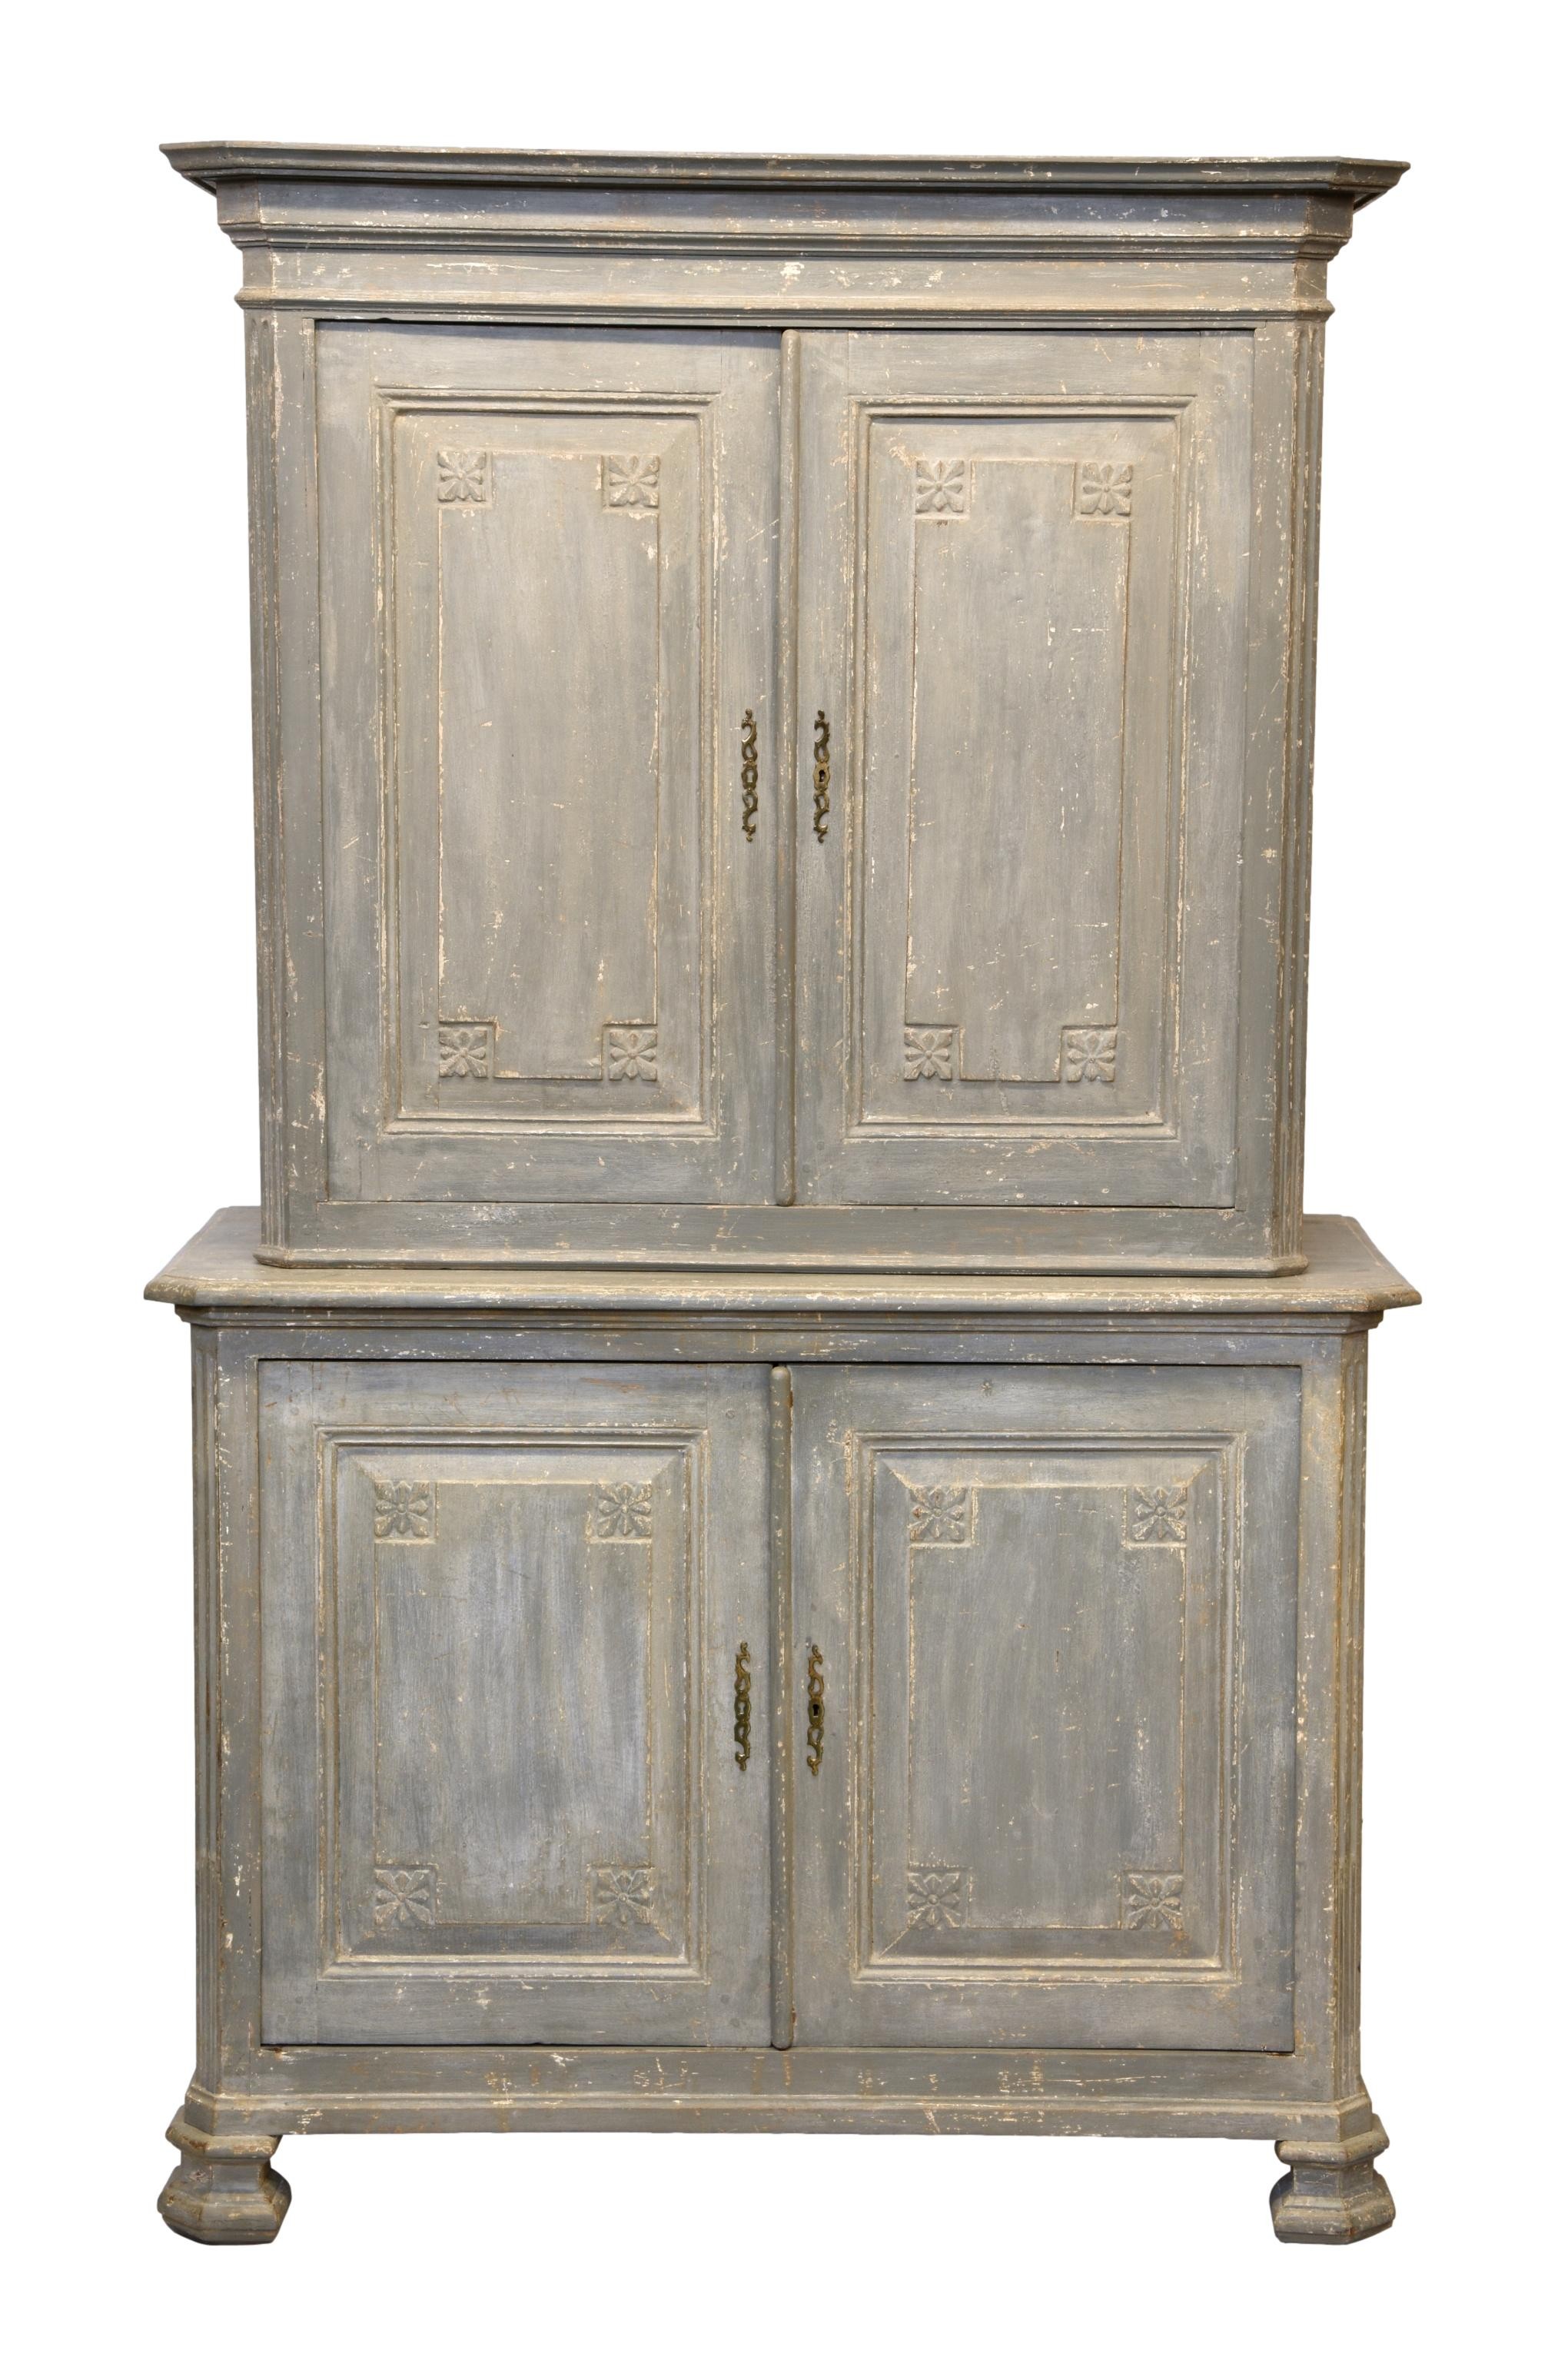 A 19th century French painted oak dresser, the flared, moulded cornice over a pair of panelled doors